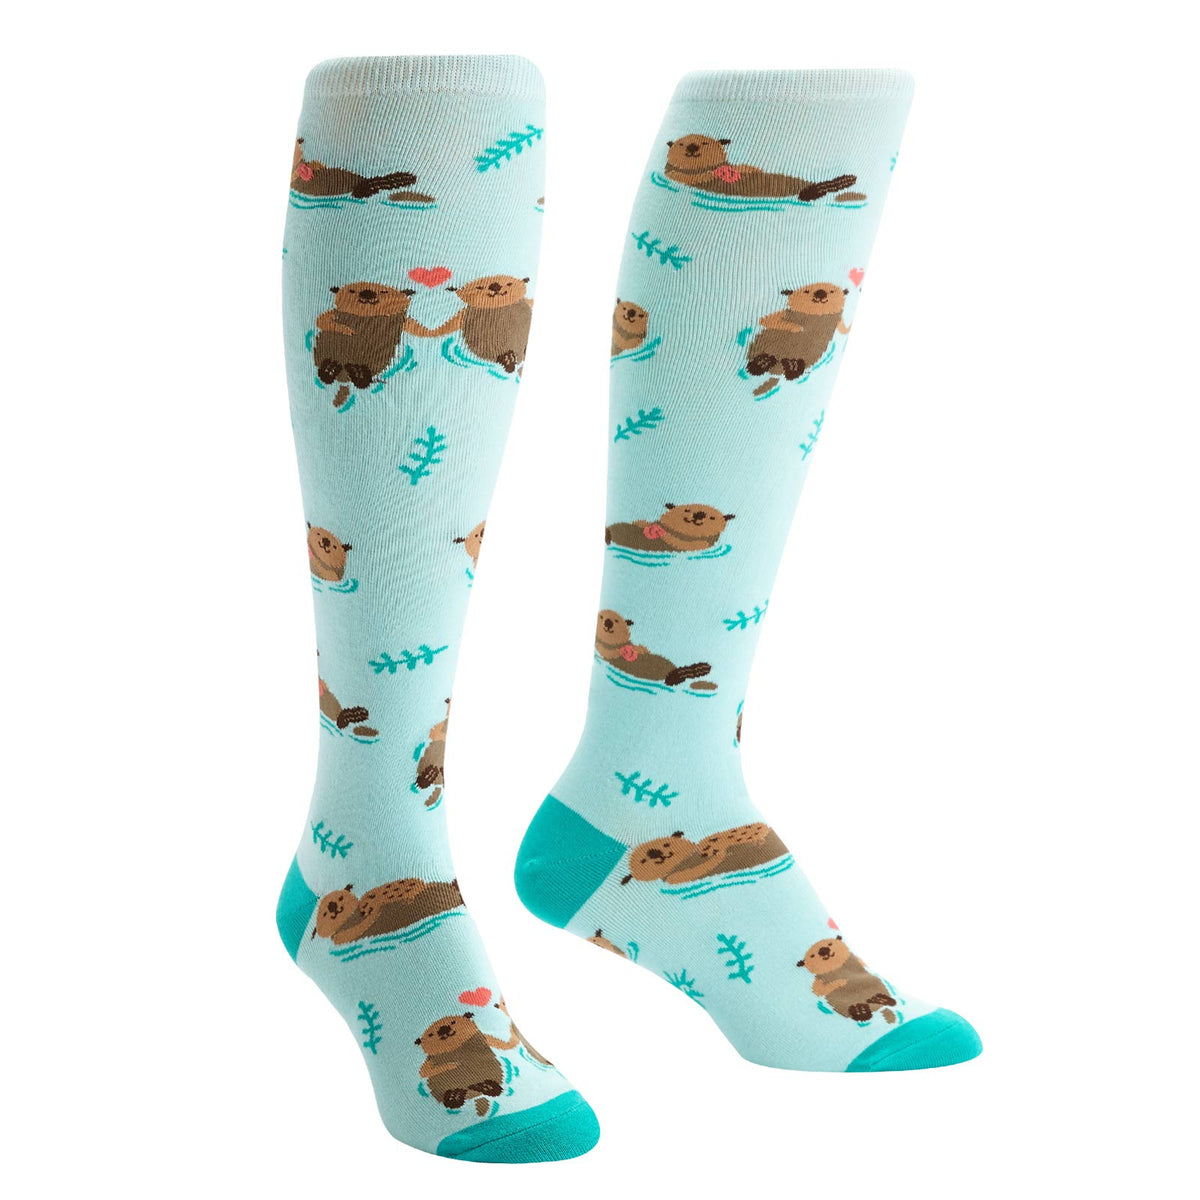 Smiling otters float about this knee high sock, holding hands and cuddling their young.